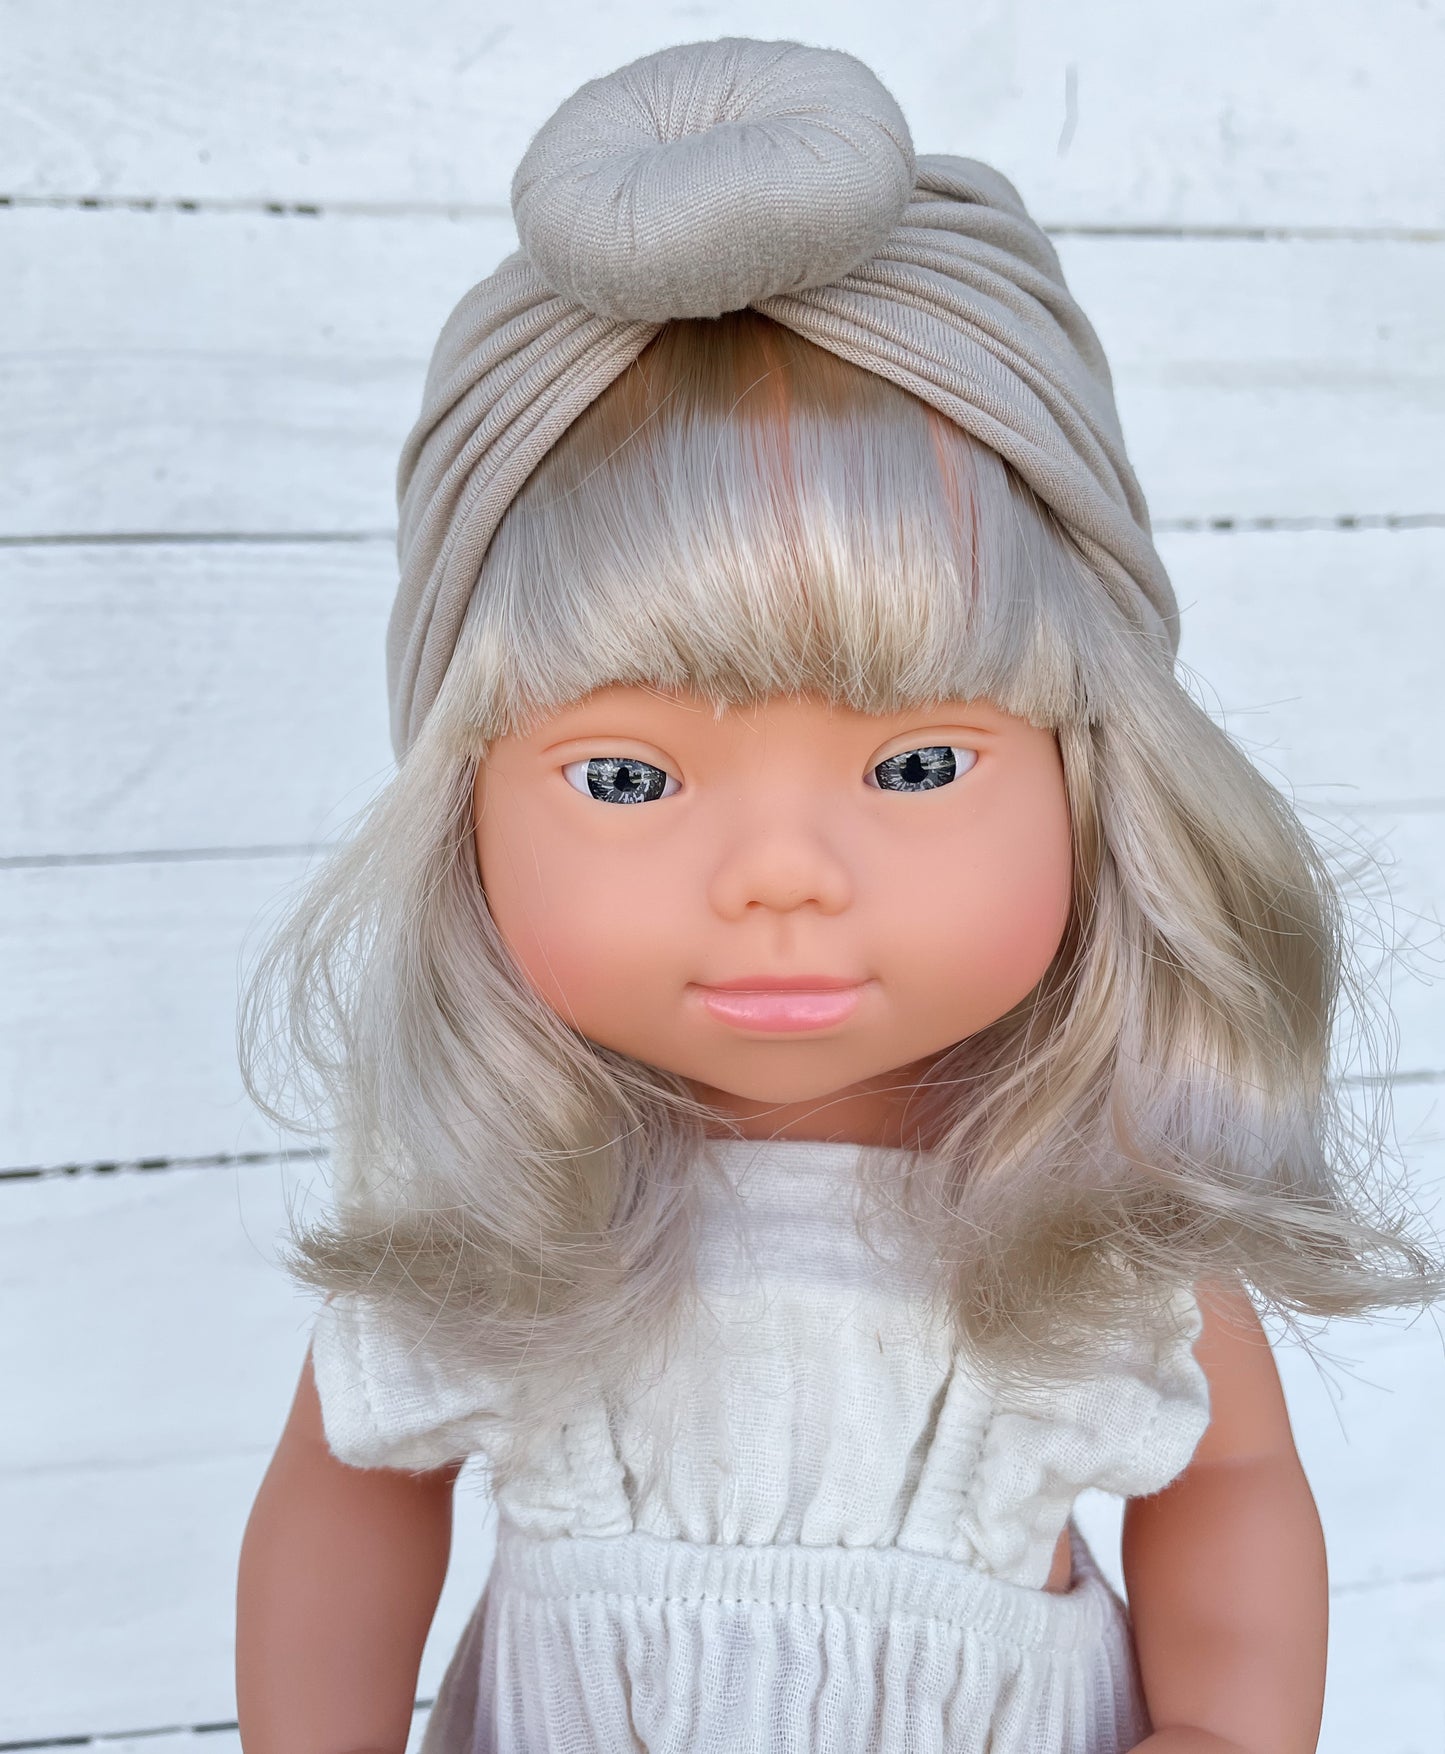 Alice - Miniland Girl Doll With Down Syndrome